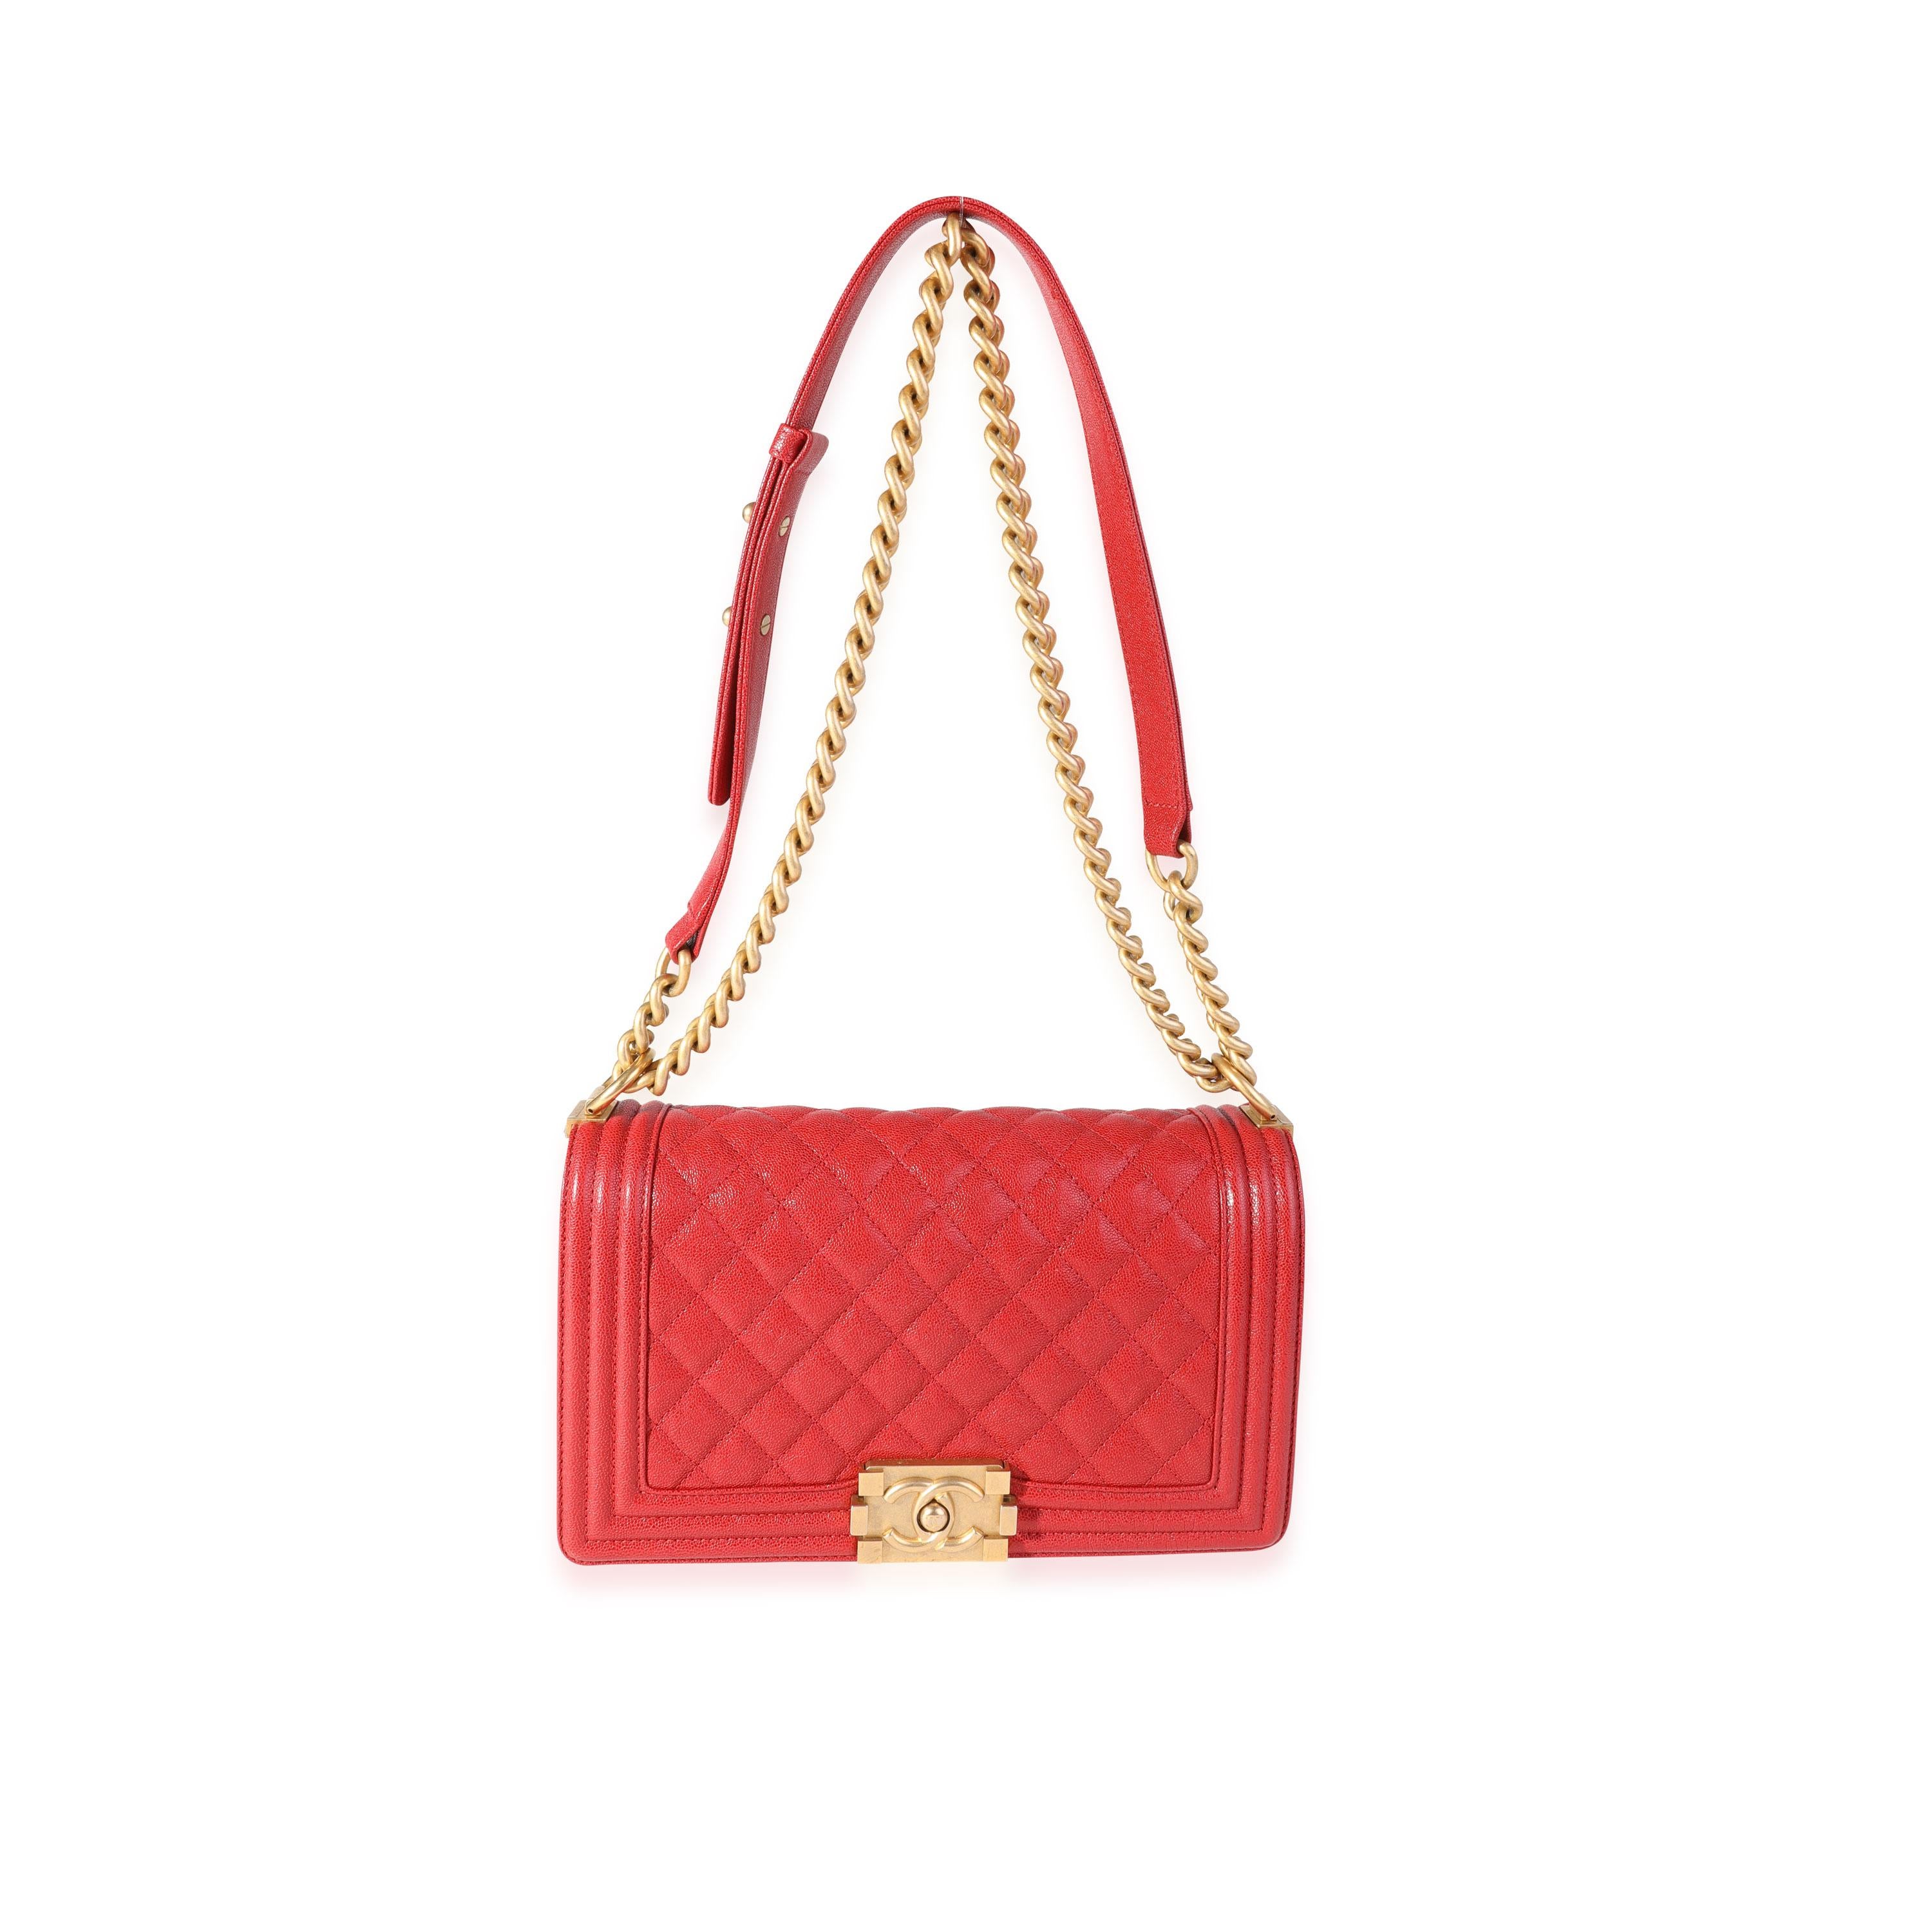 Listing Title: Chanel Red Quilted Caviar Old Medium Boy Bag
SKU: 118473
Condition: Pre-owned (3000)
Handbag Condition: Excellent
Condition Comments: Excellent Condition. Plastic on some hardware. No visible signs of wear.
Brand: Chanel
Model: Boy